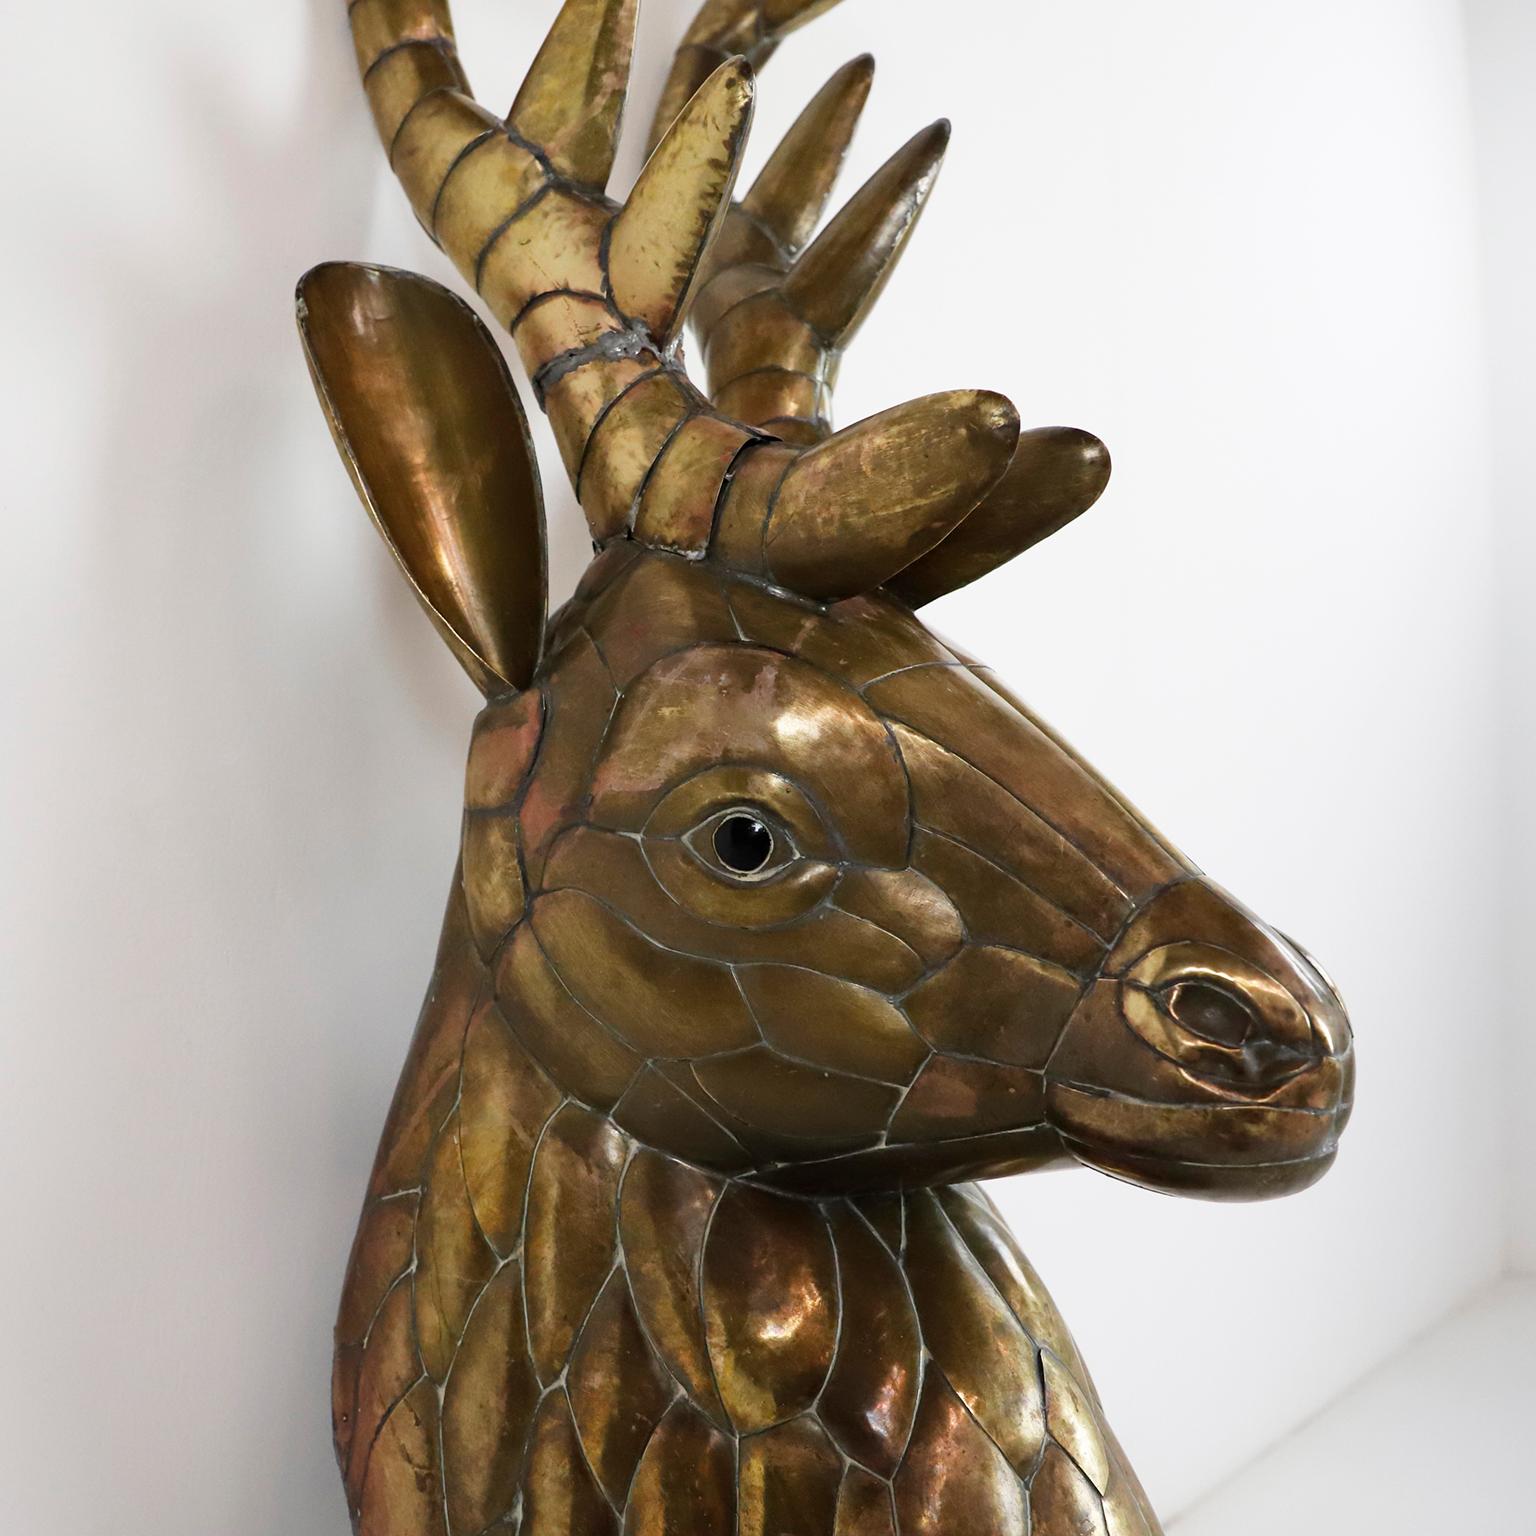 Mounted Stag head made in brass, cut bent and assembled, circa 1960.

Sergio Bustamante is a Mexican Artist and sculptor. He began with paintings and papier mache figures, inaugurating the first exhibit of his works at the Galeria Misrachi in